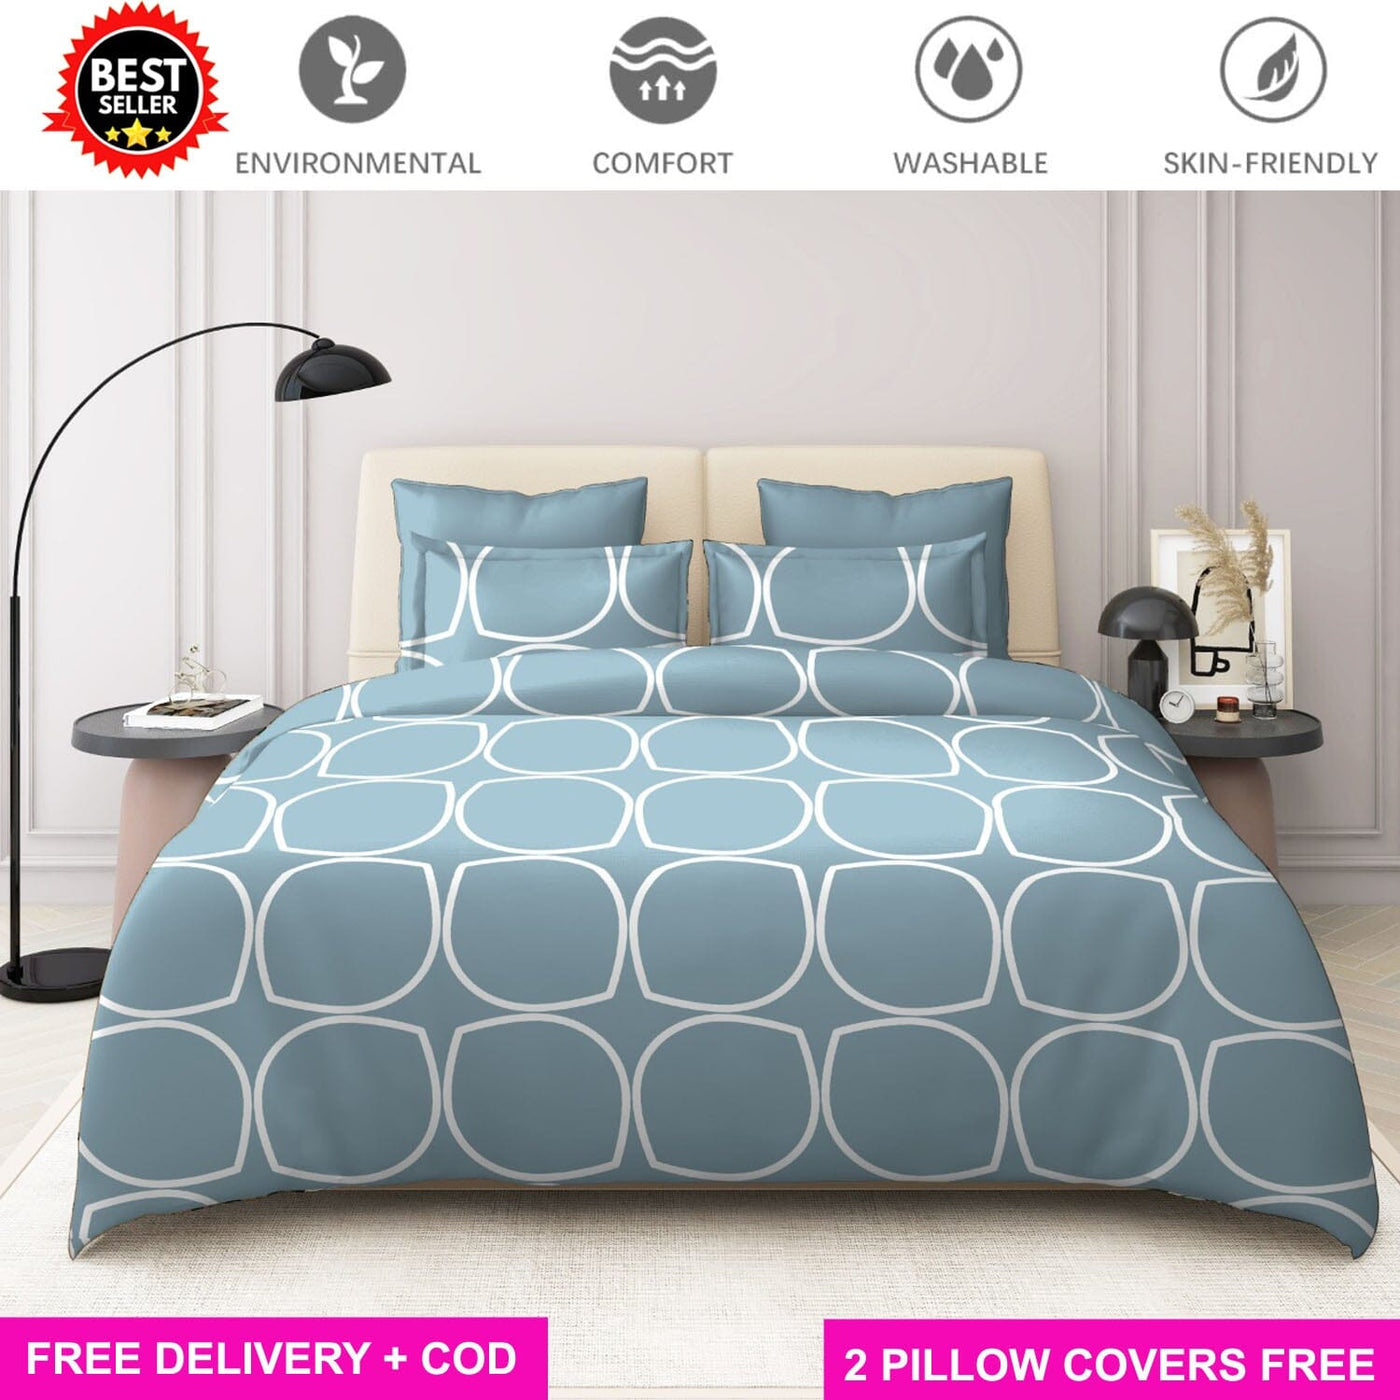 Cotton Elastic Fitted Bedsheet with 2 Pillow Covers - Fits with any Beds & Mattresses Great Happy IN Grey Ellipse KING SIZE 